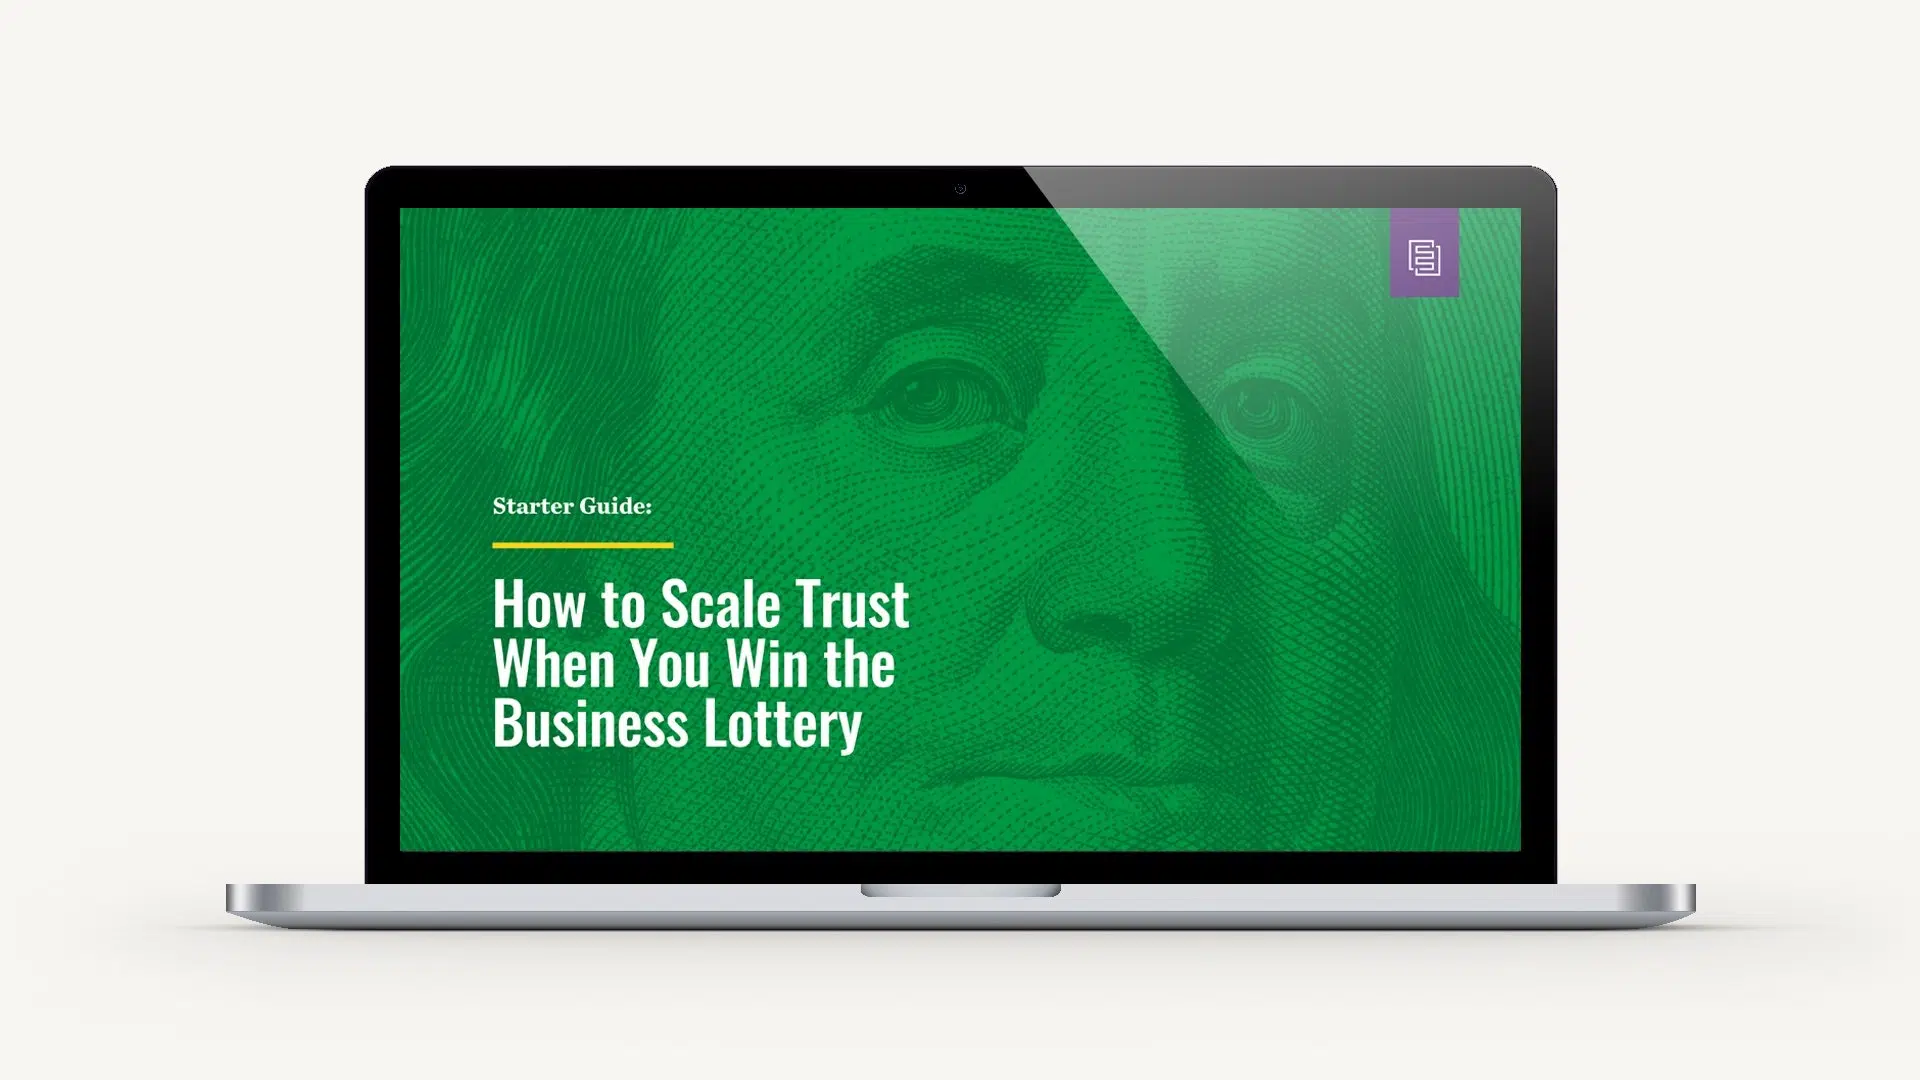 Guide: How to Scale Trust When You Win the Business Lottery